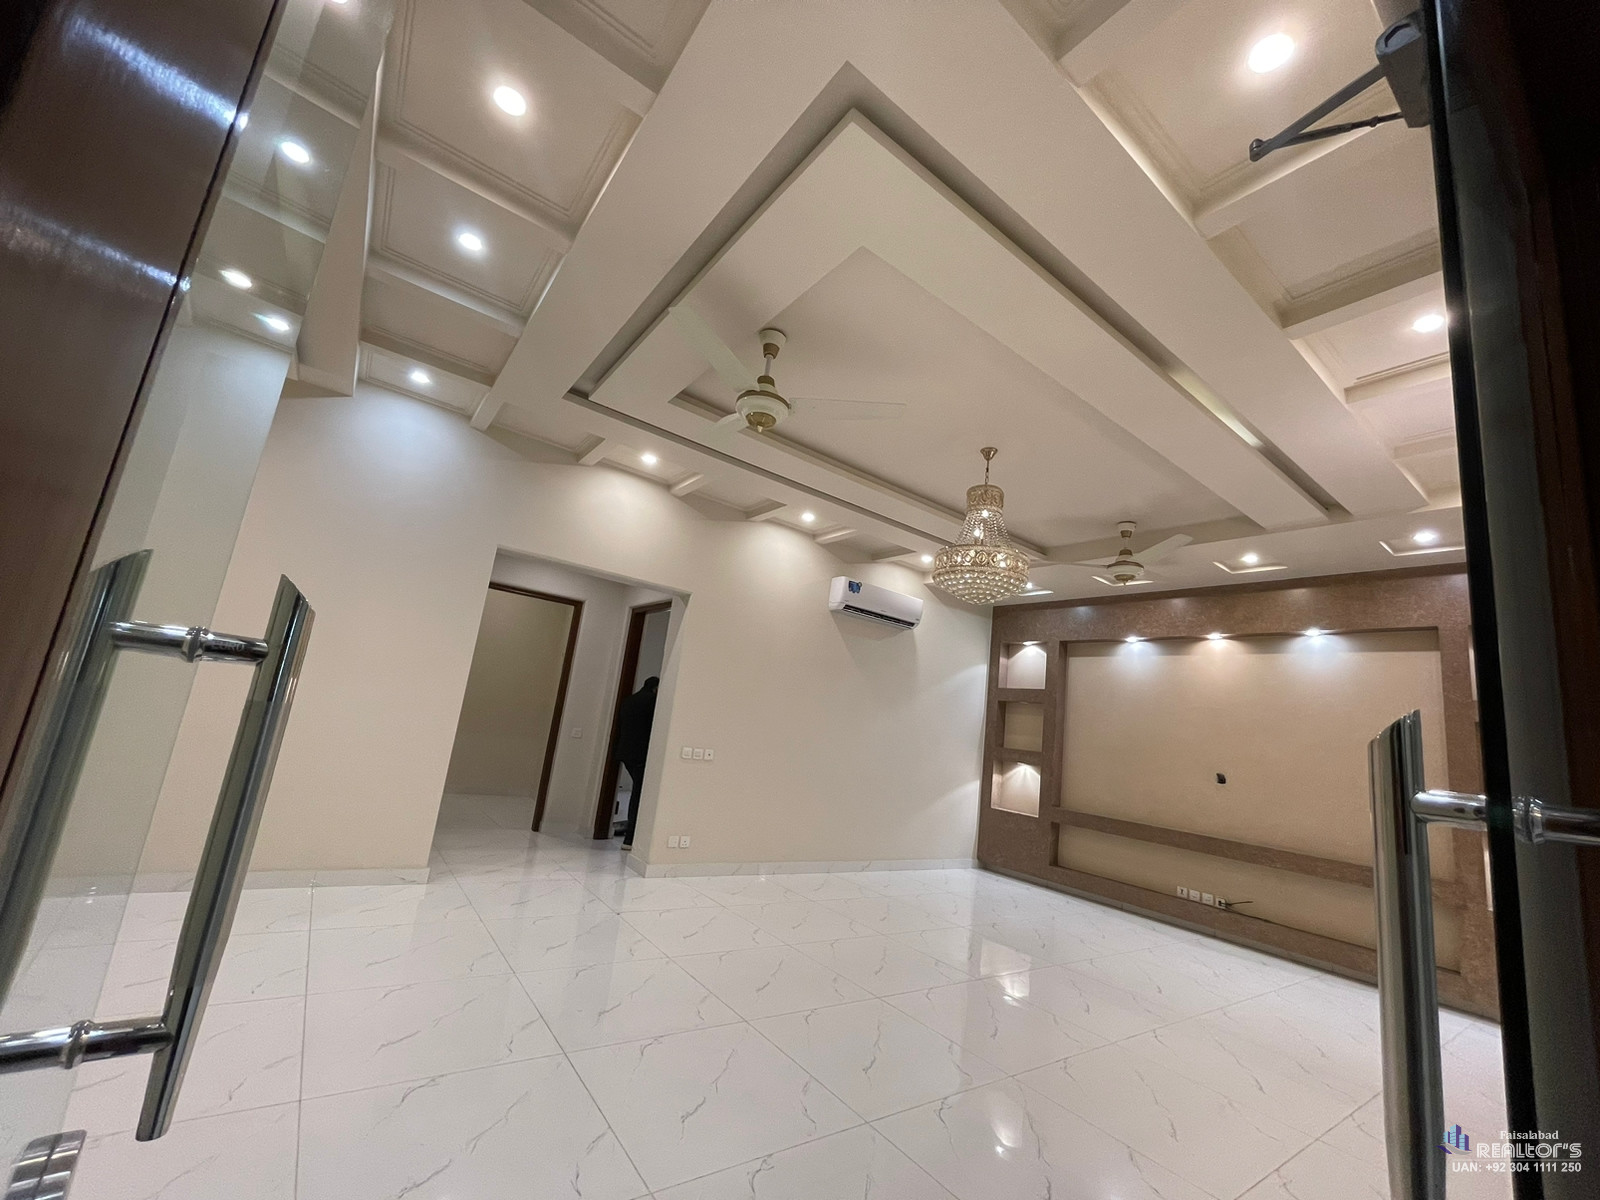 18.5 Marla home for sale in Faisalabad